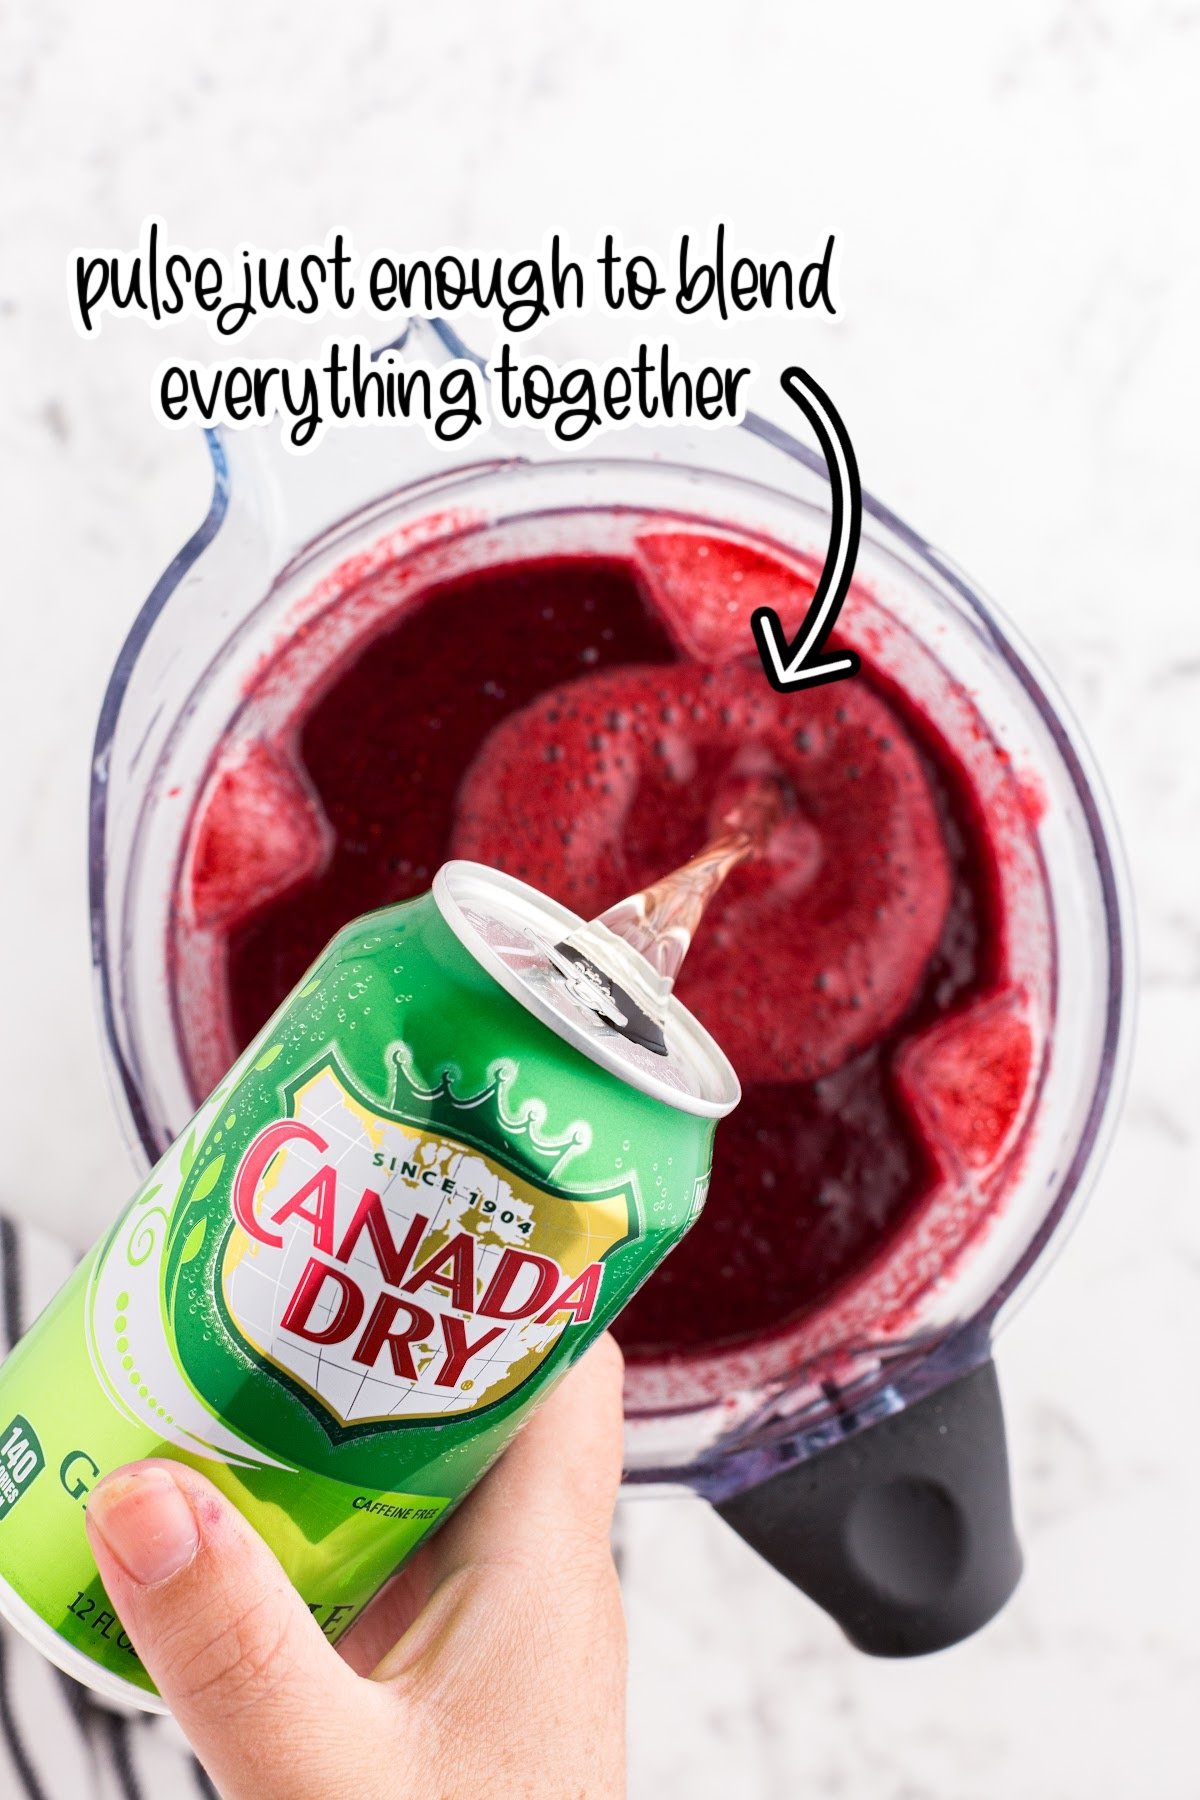 Ginger ale poured into blended berries with text overlay.